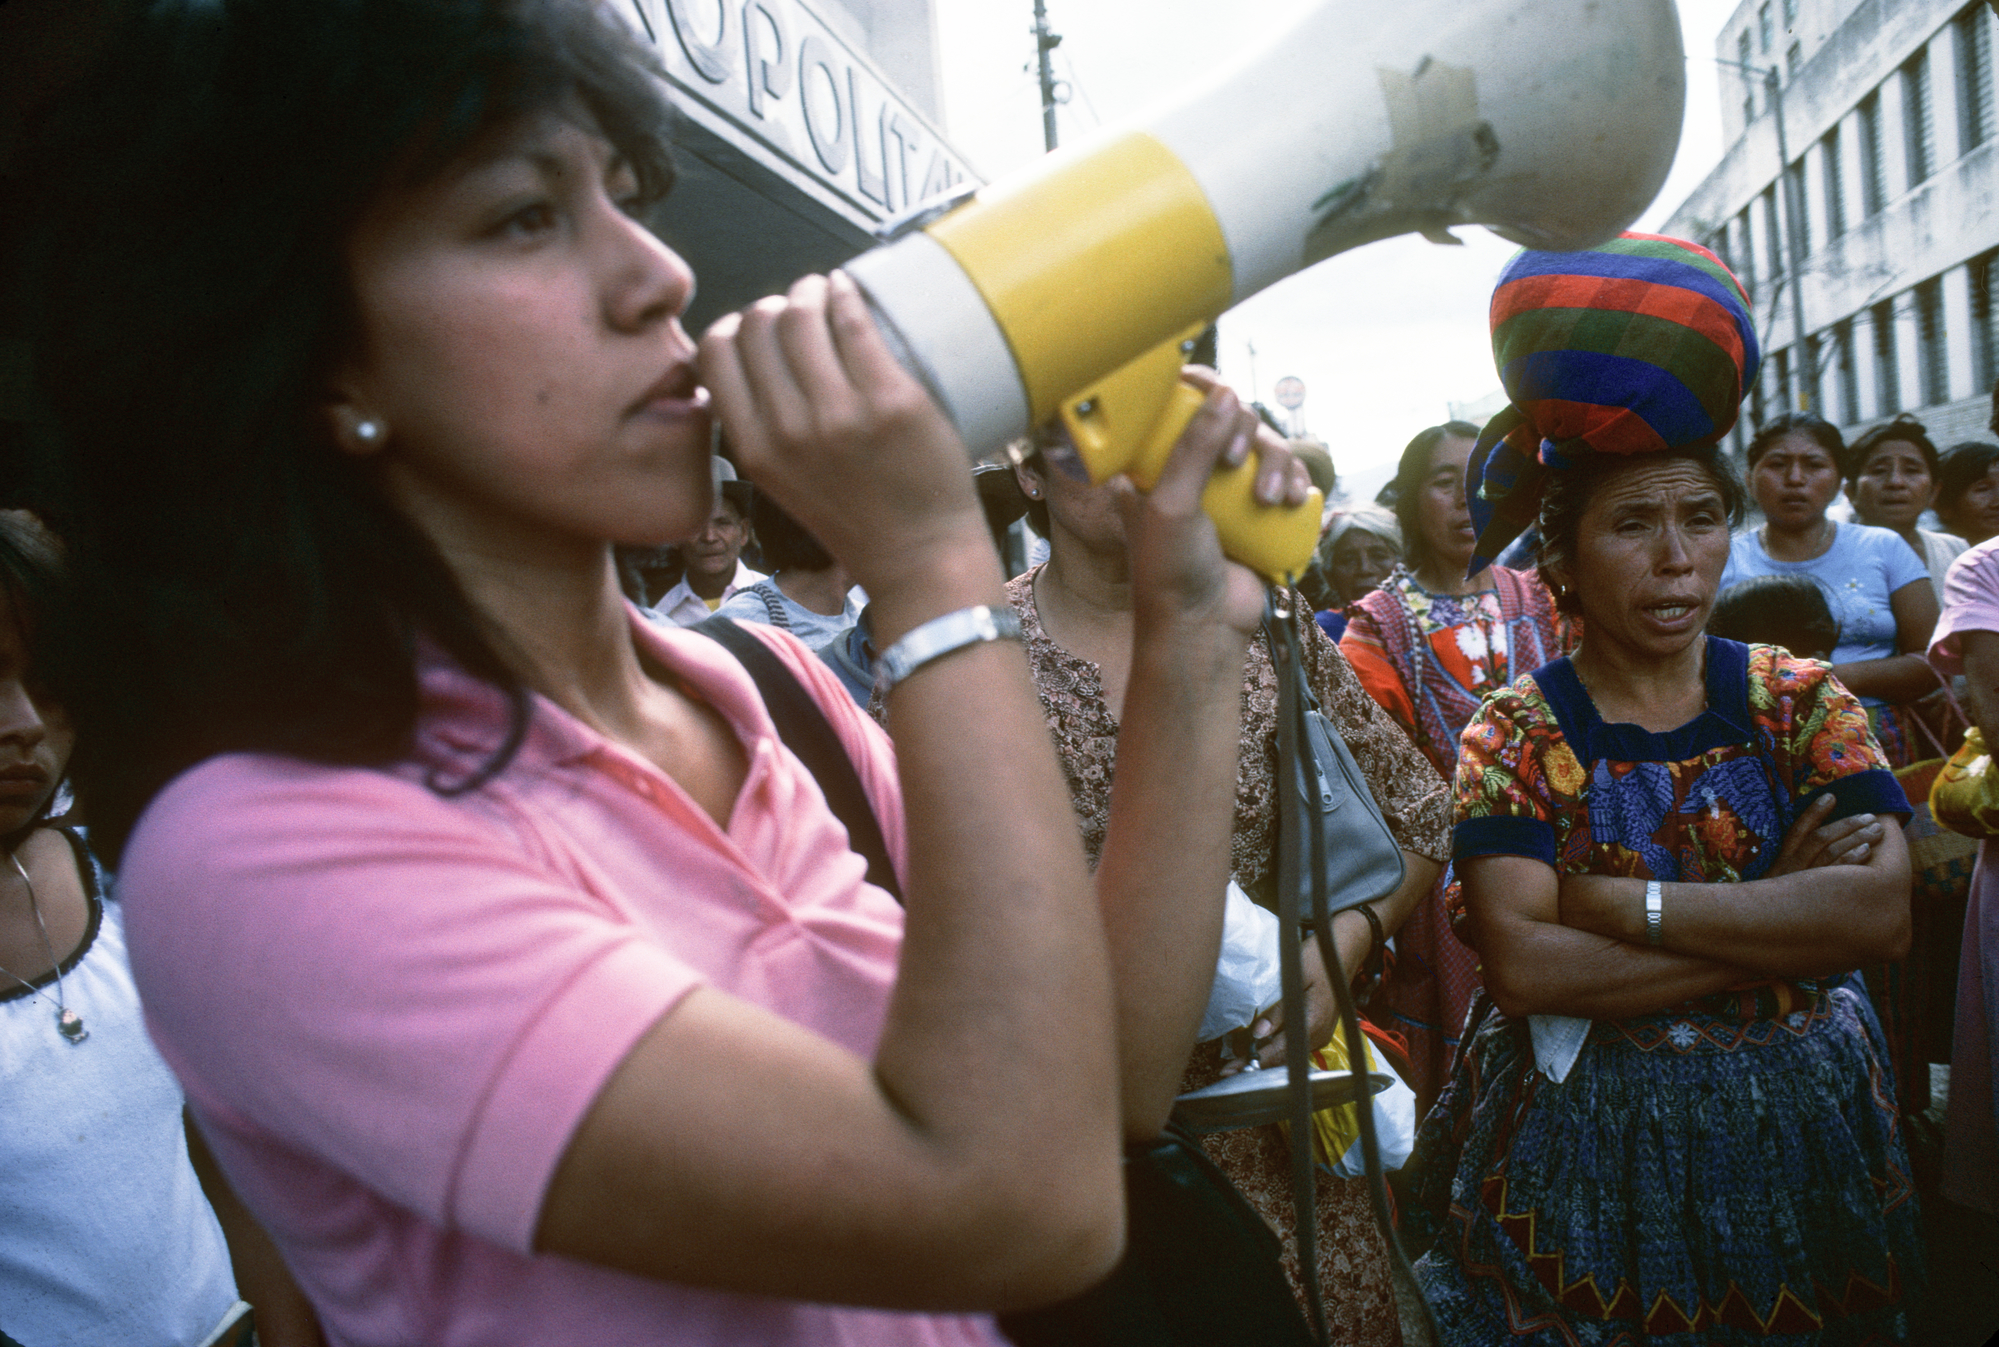 Rosario Godoy de Cuevas speaks into a megaphone at a demonstration at a GAM in Guatemala, 1985.  Grupo de Apoyo Mutuo (GAM; Mutual Support Group) support group for families whose relatives had "disappeared".